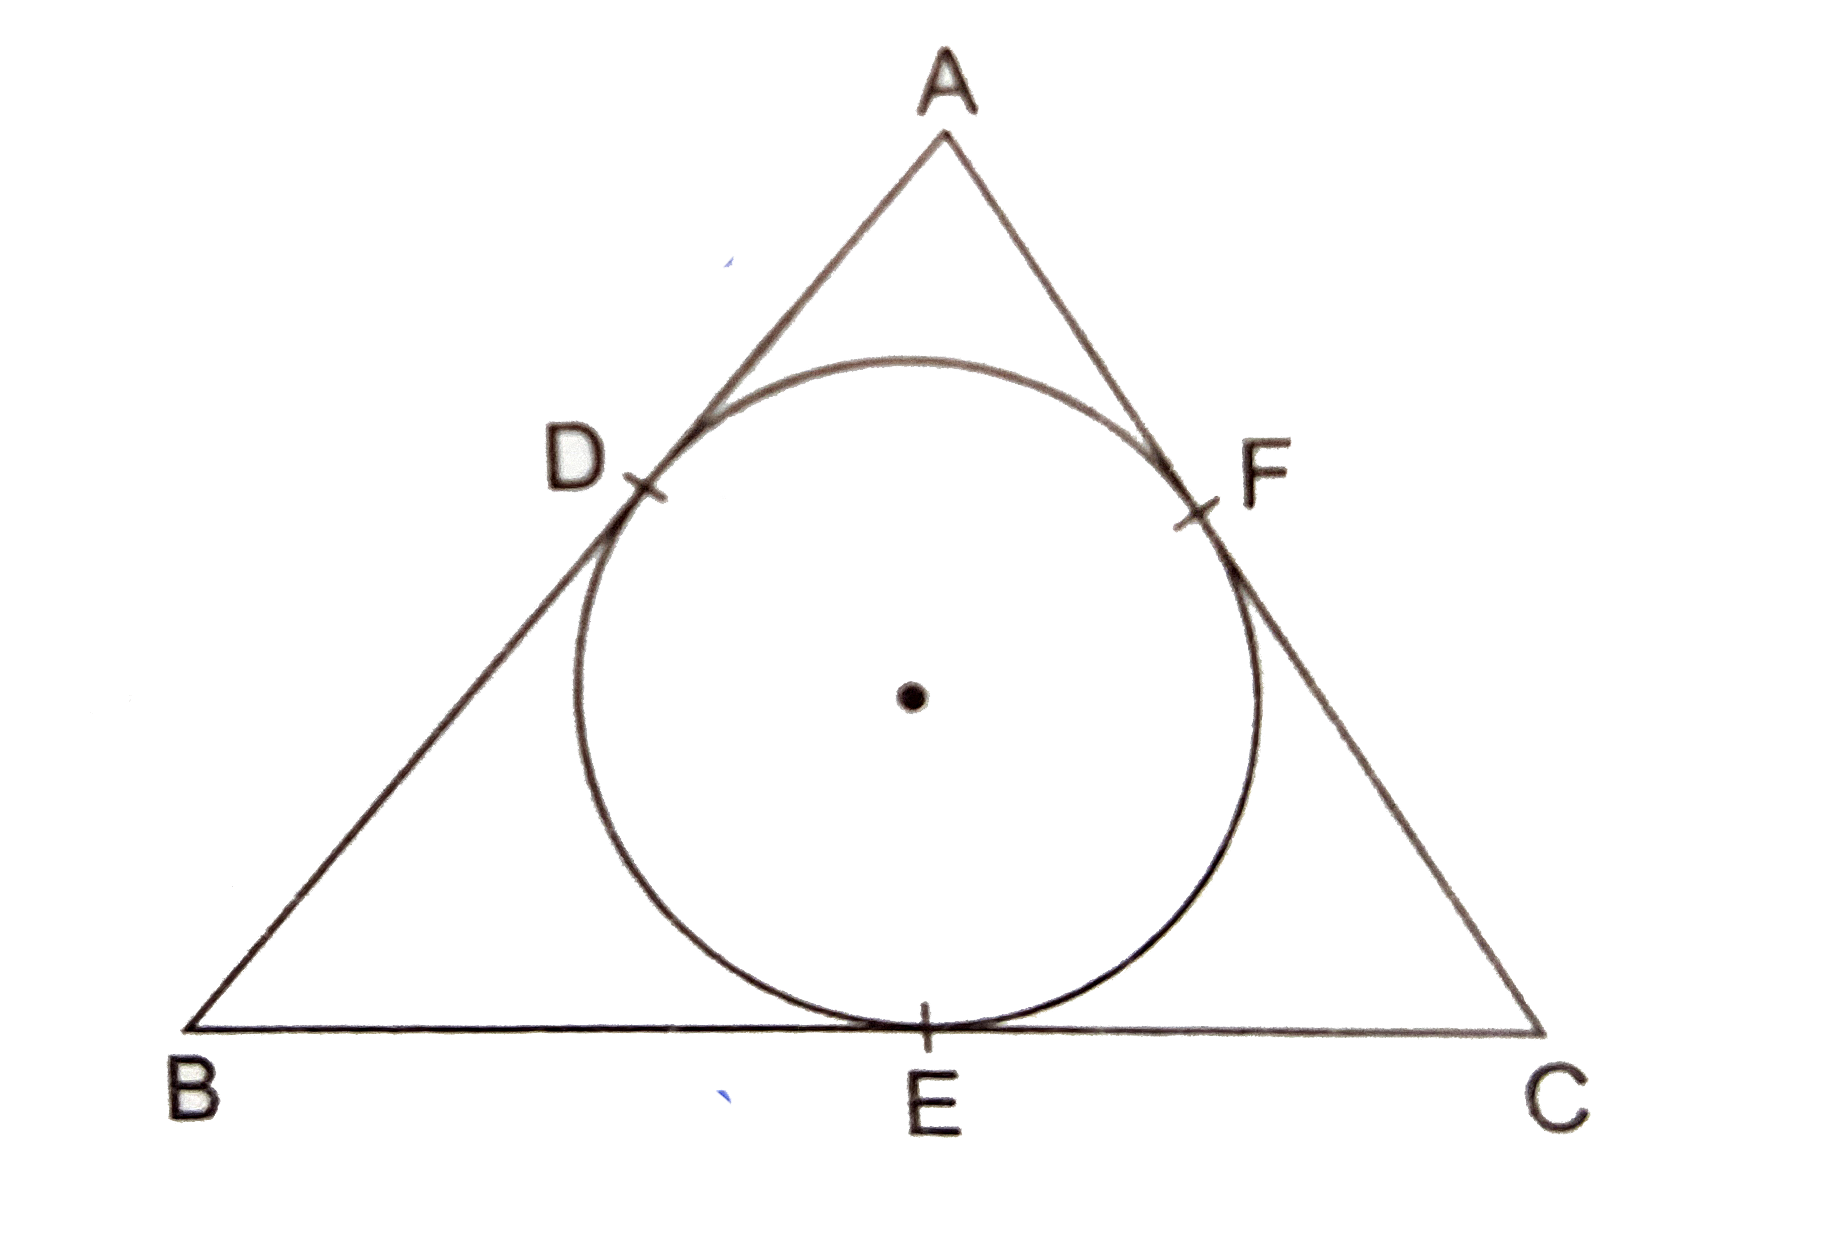 In the given figure, a circle inscribed in a triangle ABC, touches the sides AB, BC and AC at points D, E and F respectively. If AB=12cm, BC=8cm and AC=10cm, find the lengths of AD, BE and CF.